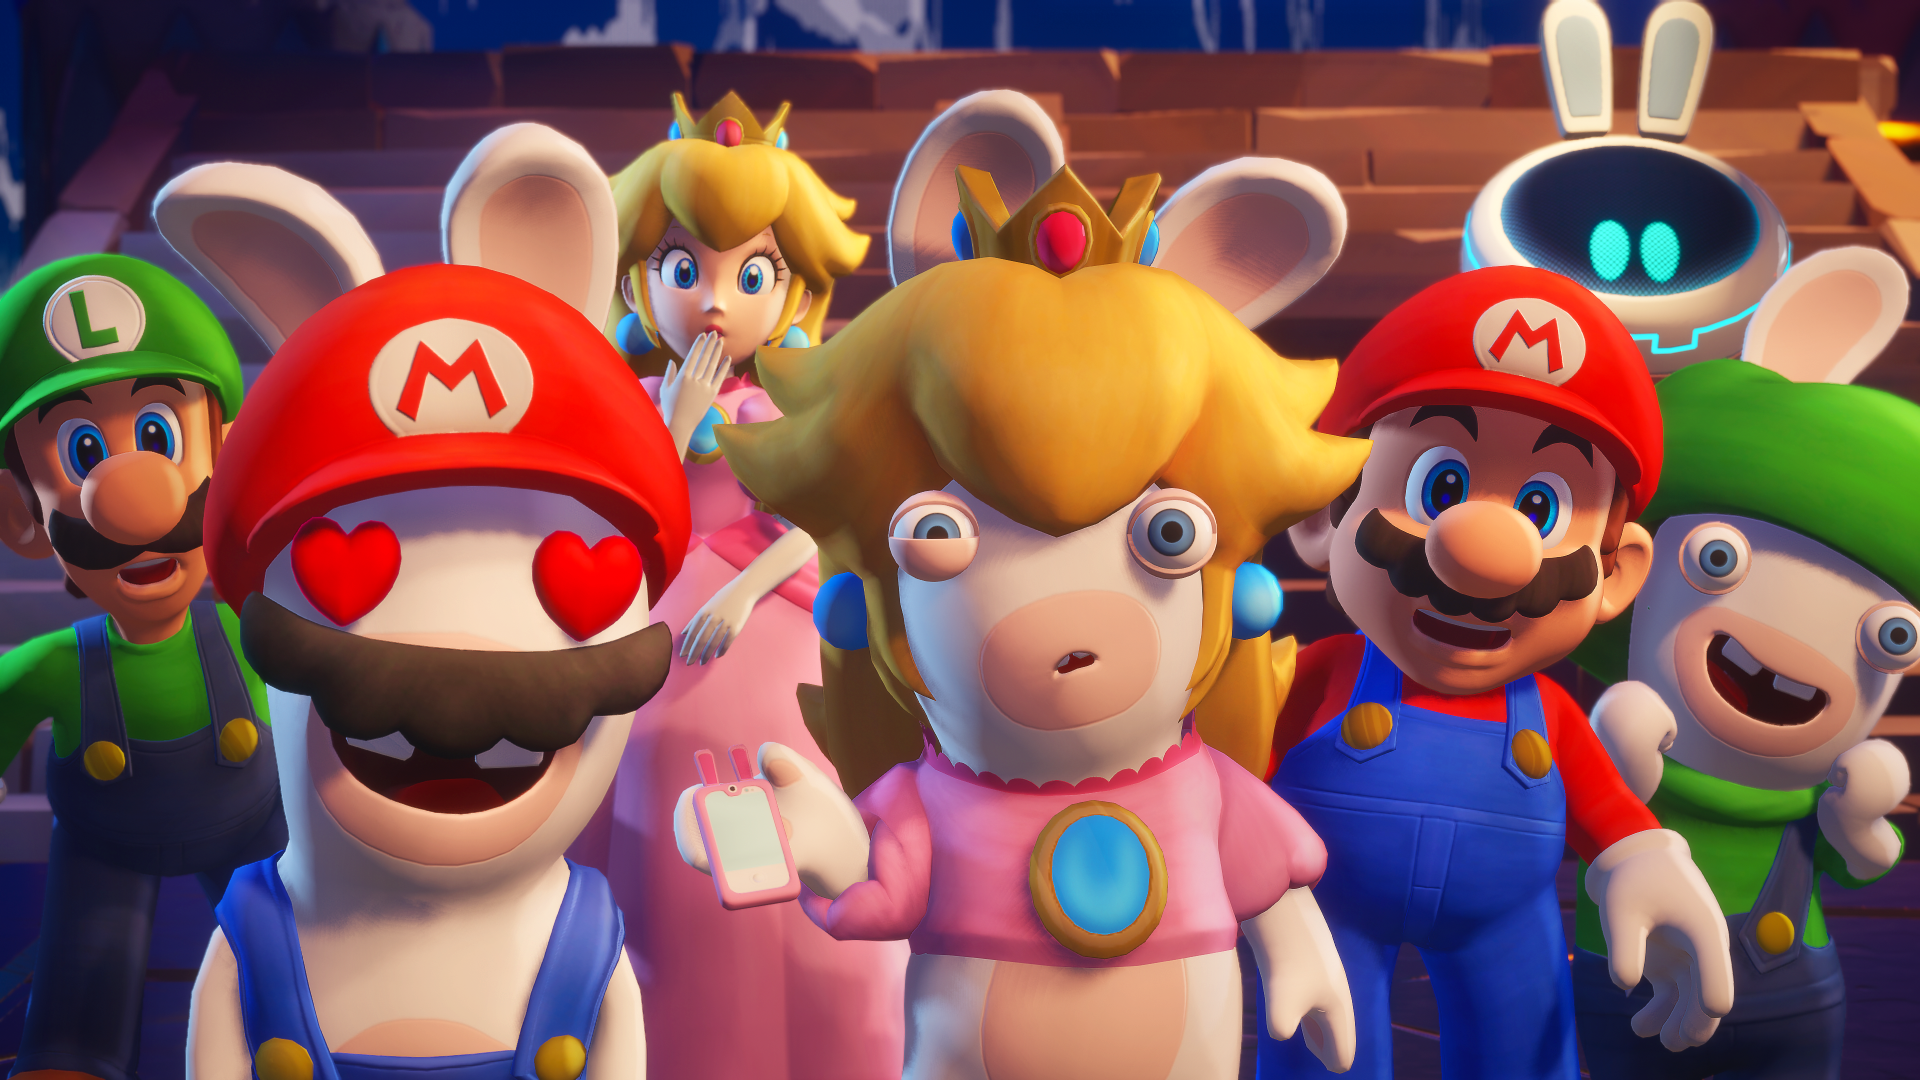 Image for Mario + Rabbids Sparks of Hope is coming to Switch next year